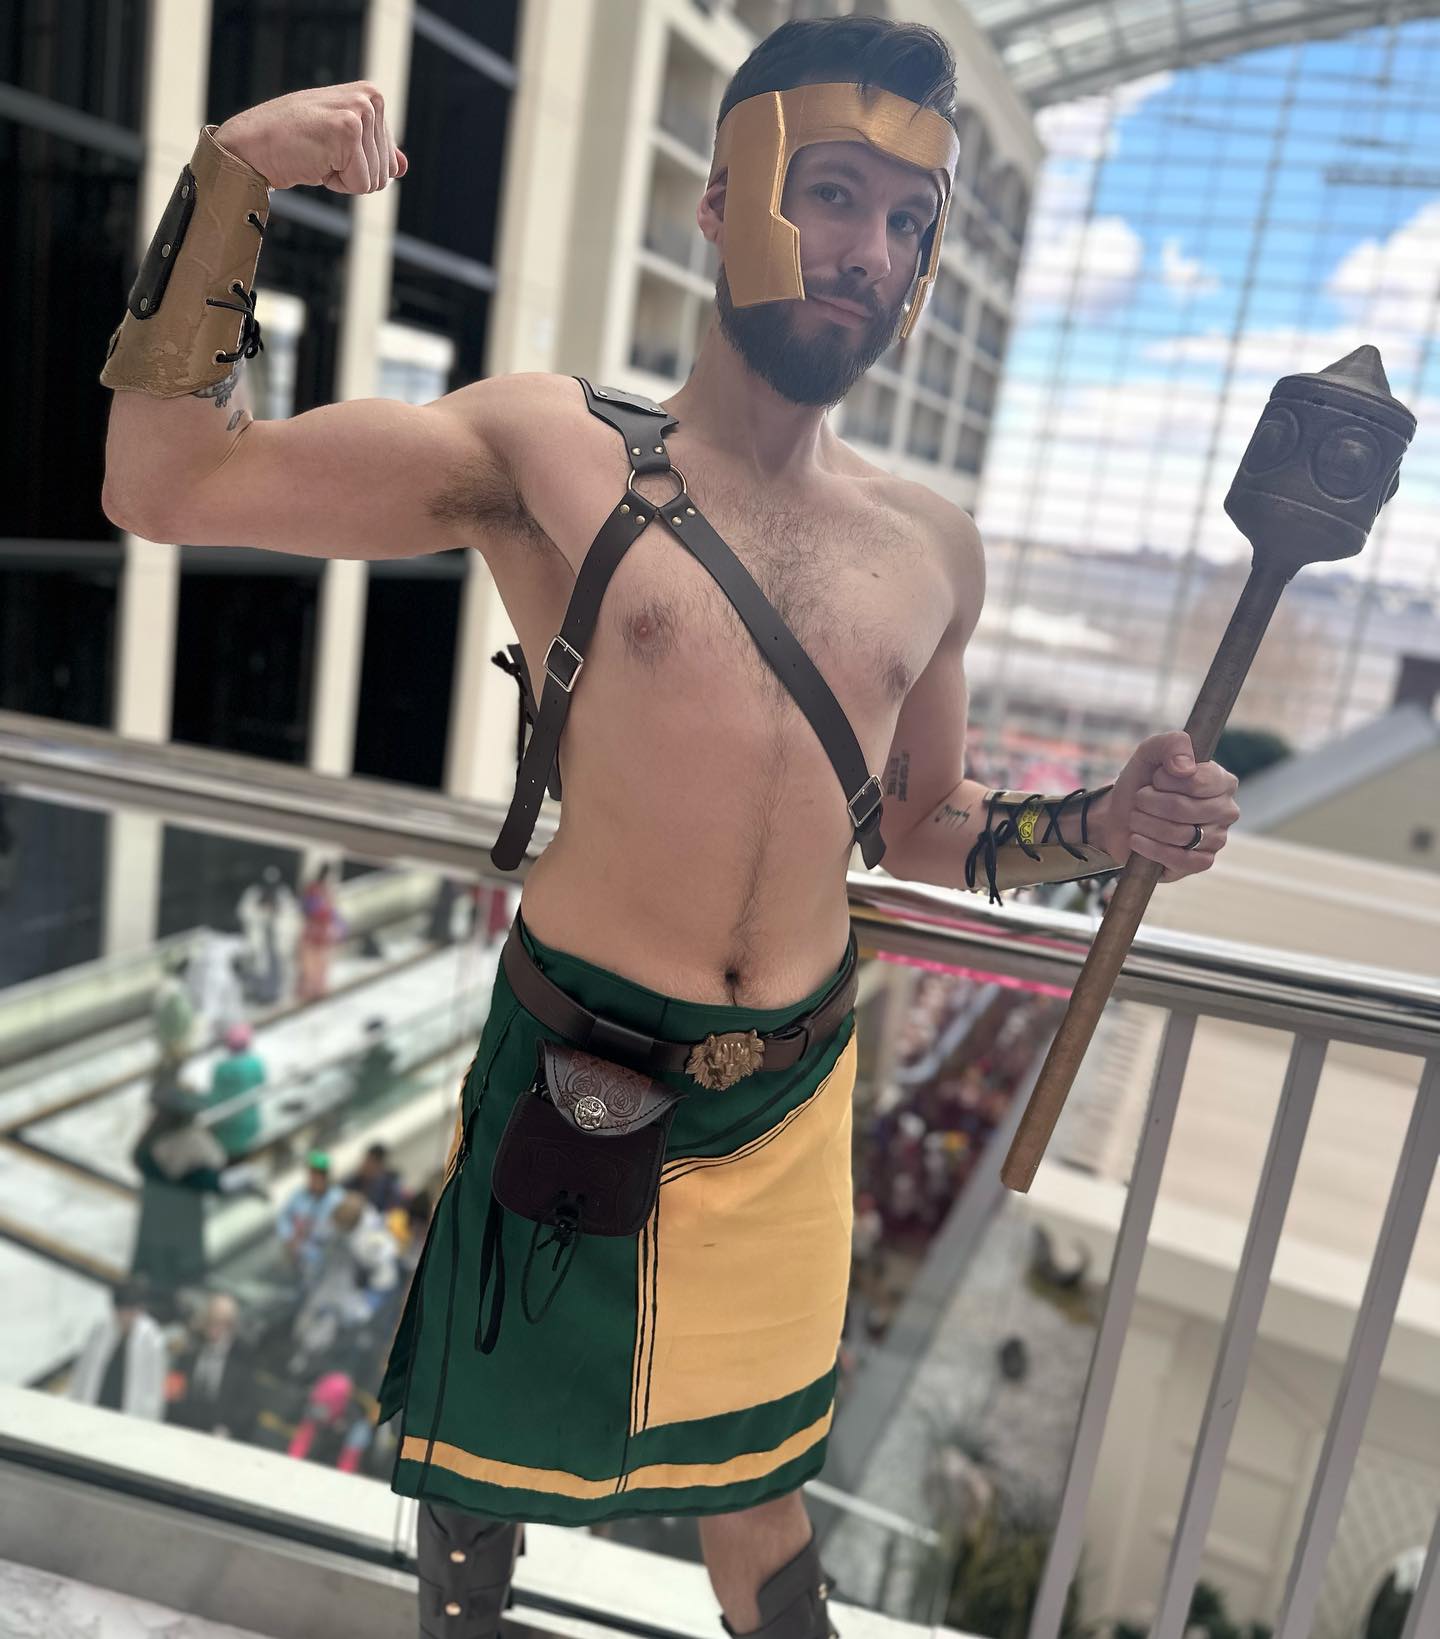 Very proud of my Marvel Hercules cosplay from KatsuCon this past weekend!
- The skirt was made by @dizzylizzy_lauren 
- The helmet and mace were 3D printed by @clare_and_matt_and_jasper 
Swipe right for the character reference photo!
⚡️💪💪⚡️ 
#cosplay #thor #thorcosplay #thorloveandthunder #thorloveandthundercosplay #hercules #marvel #marvelcosplay #mcu #marvelhercules #marvelshercules #herculesmarvel #herculesmarvelcomics #marvelherculescosplay #herculescosplay #herculescosplaymarvel #marvelcosplayhercules #lionofolympus #katsucon2024 #katsu #katsucon